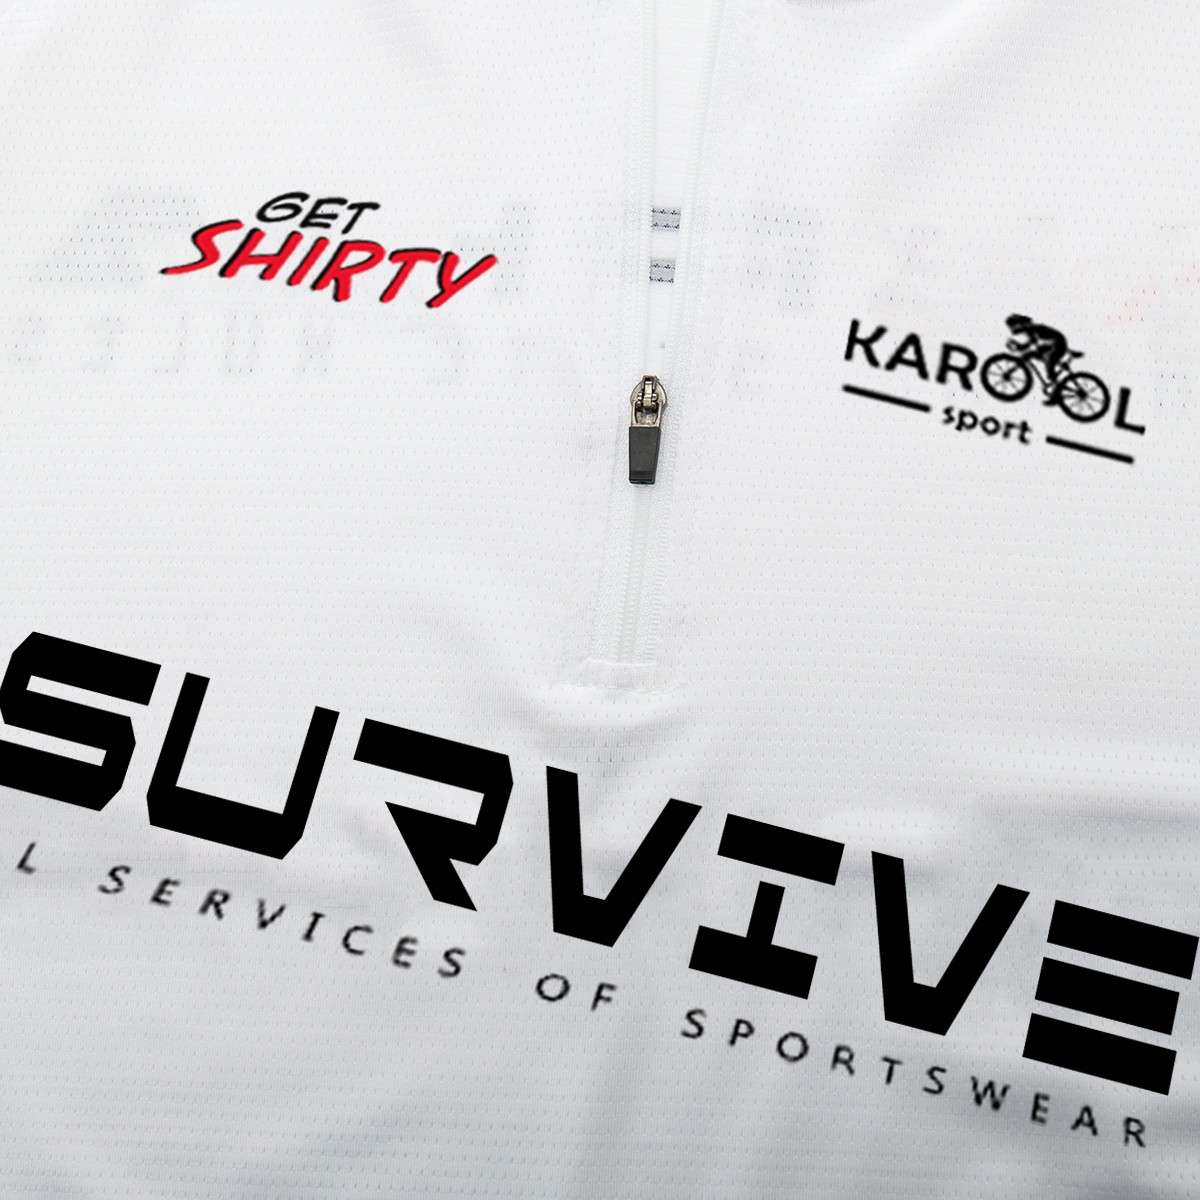 Karool printed shirts directly sale for sporting-6